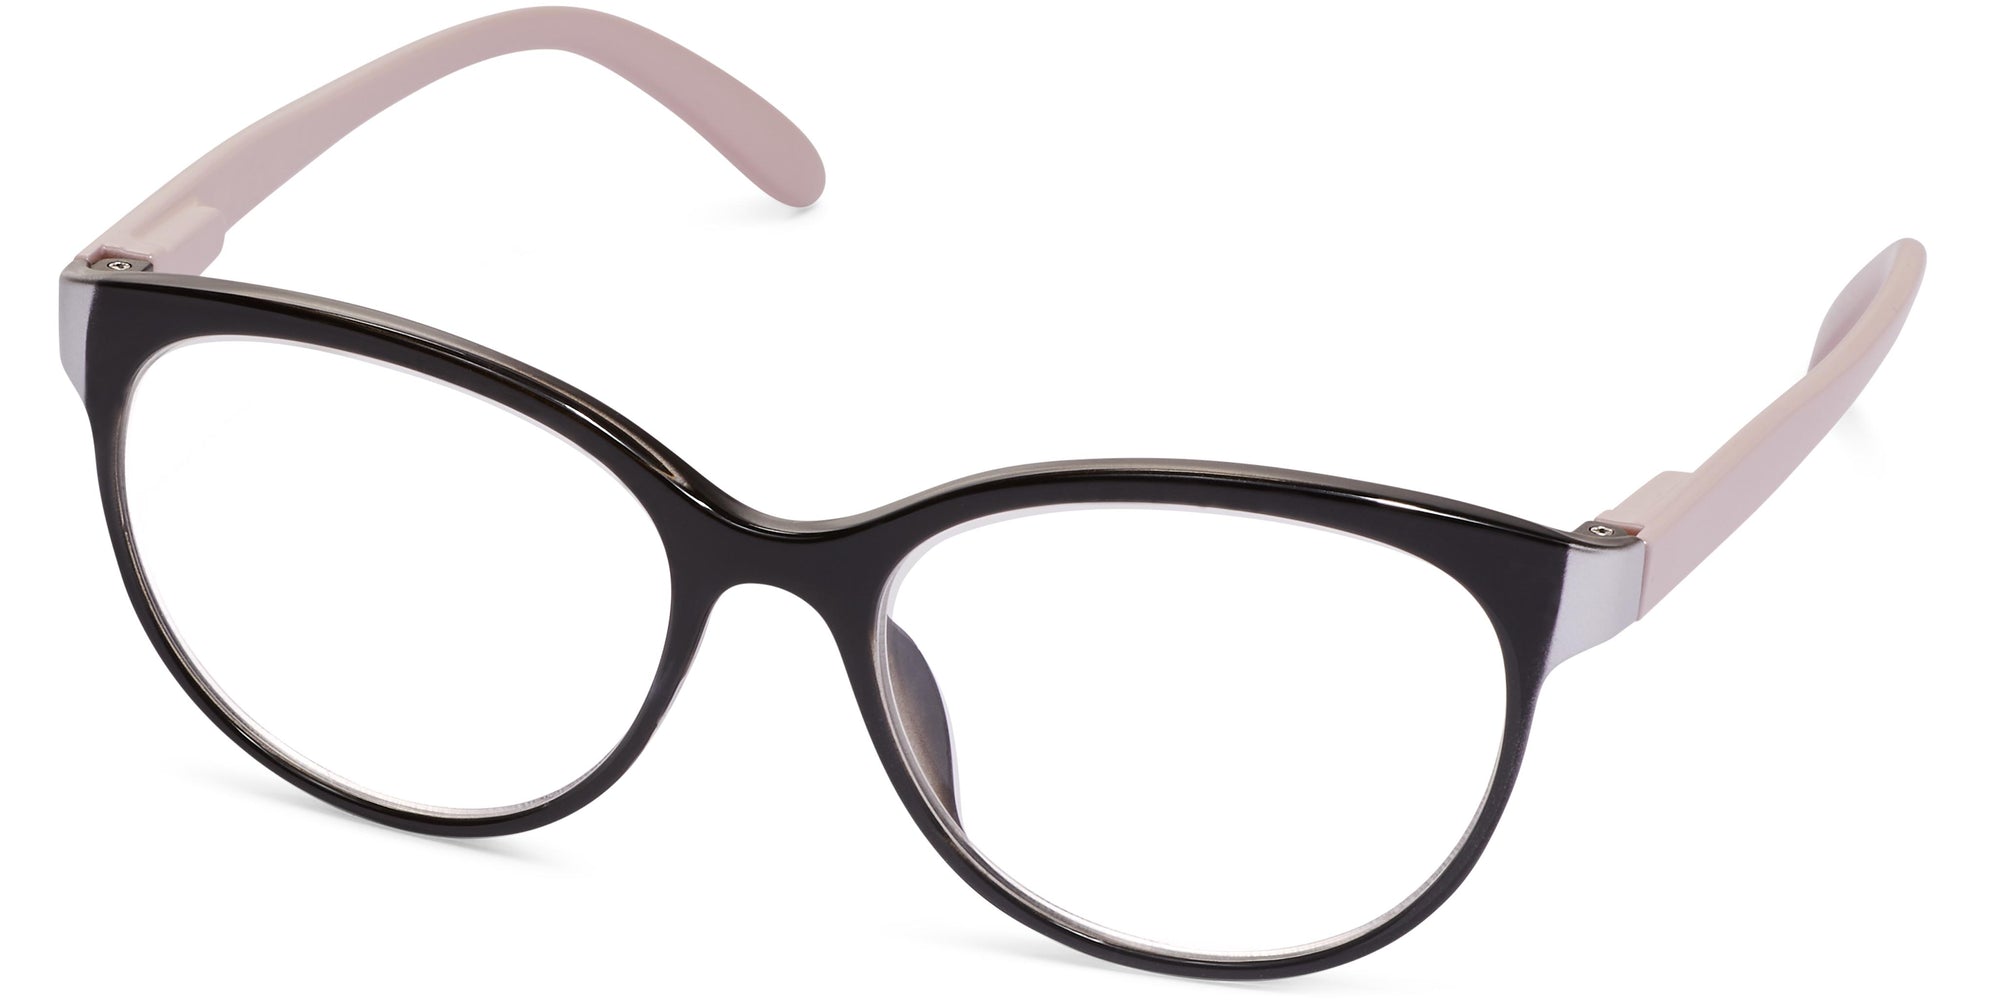 Sally - Black-Pink-Silver / 1.25 - Reading Glasses